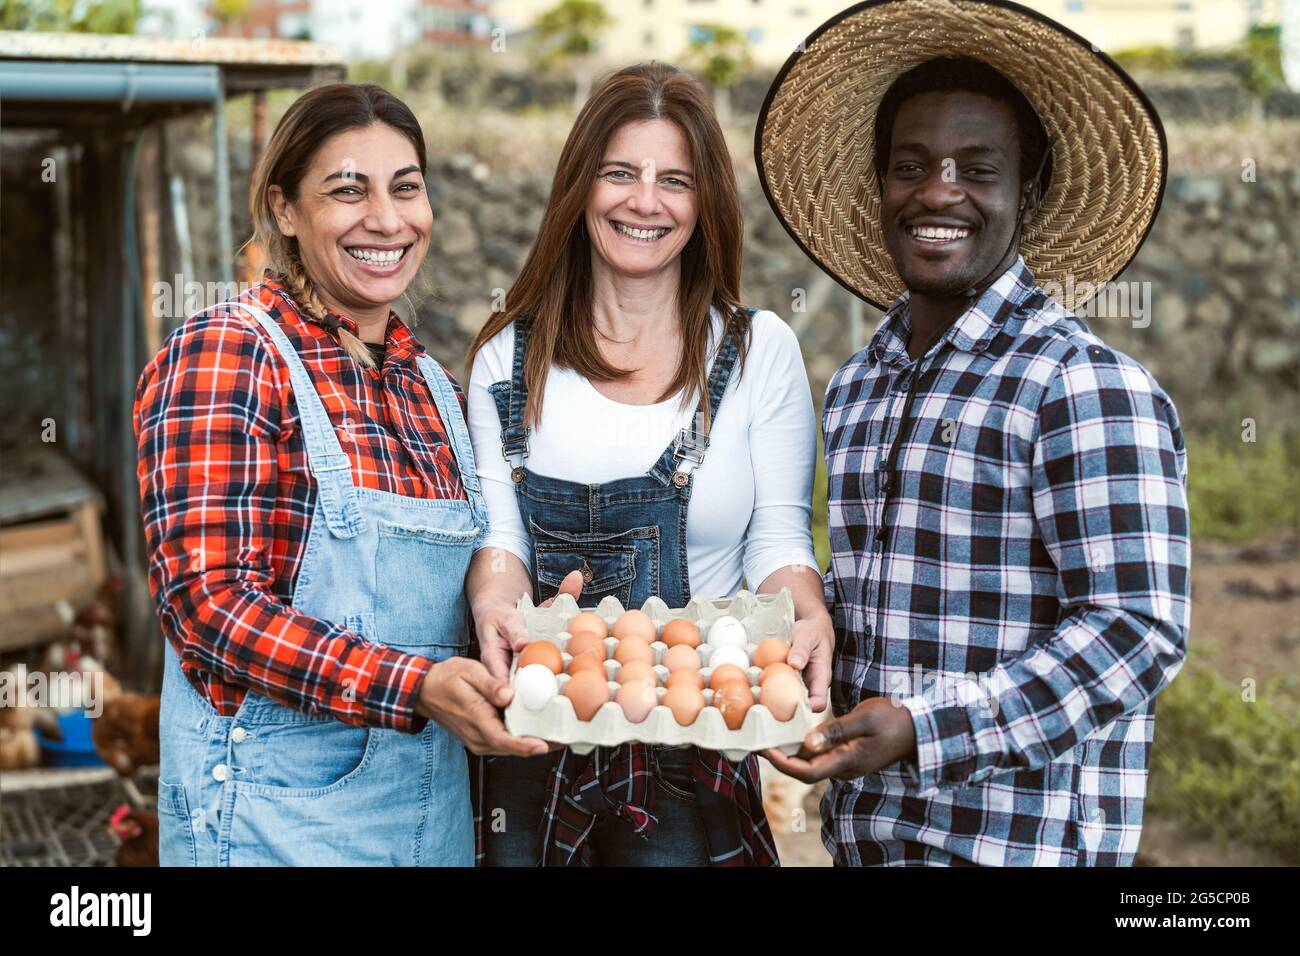 Happy farmers picking up fresh eggs in henhouse garden - Farm people lifestyle concept Stock Photo